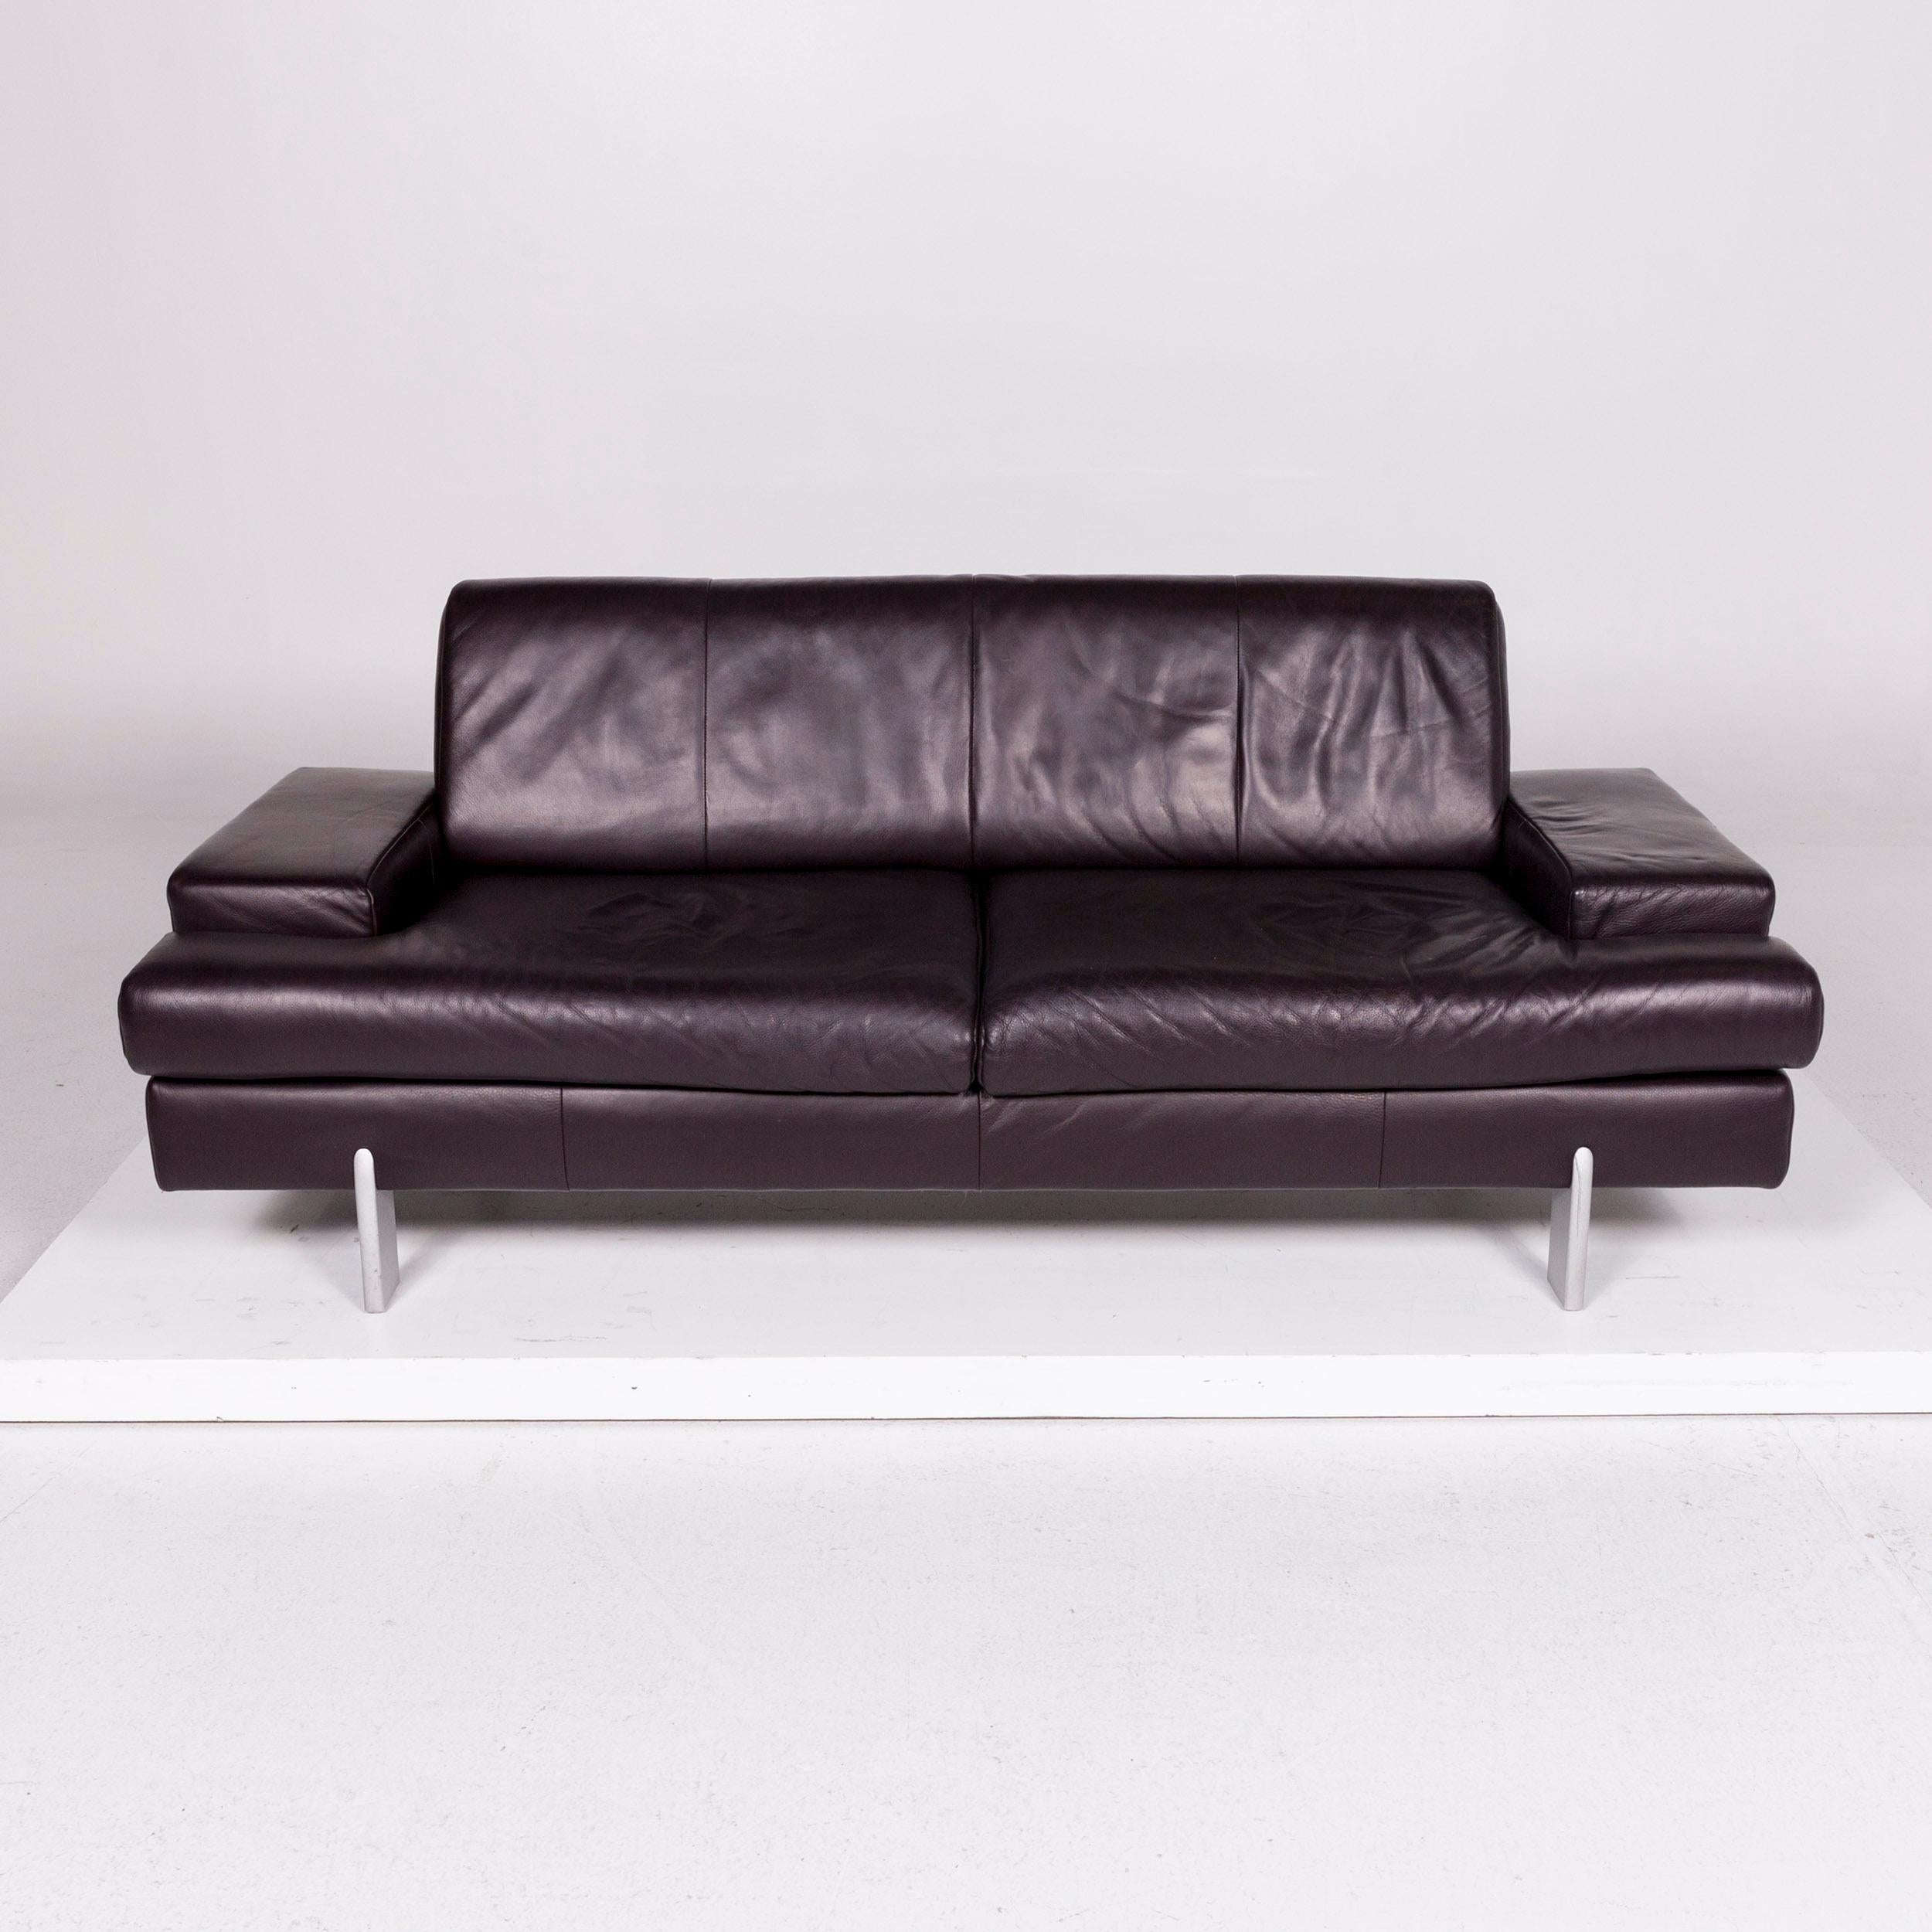 BMP Rolf Benz Leather Sofa Set Eggplant 1 Three-Seat, 1 Two-Seat, 1 In Good Condition For Sale In Cologne, DE